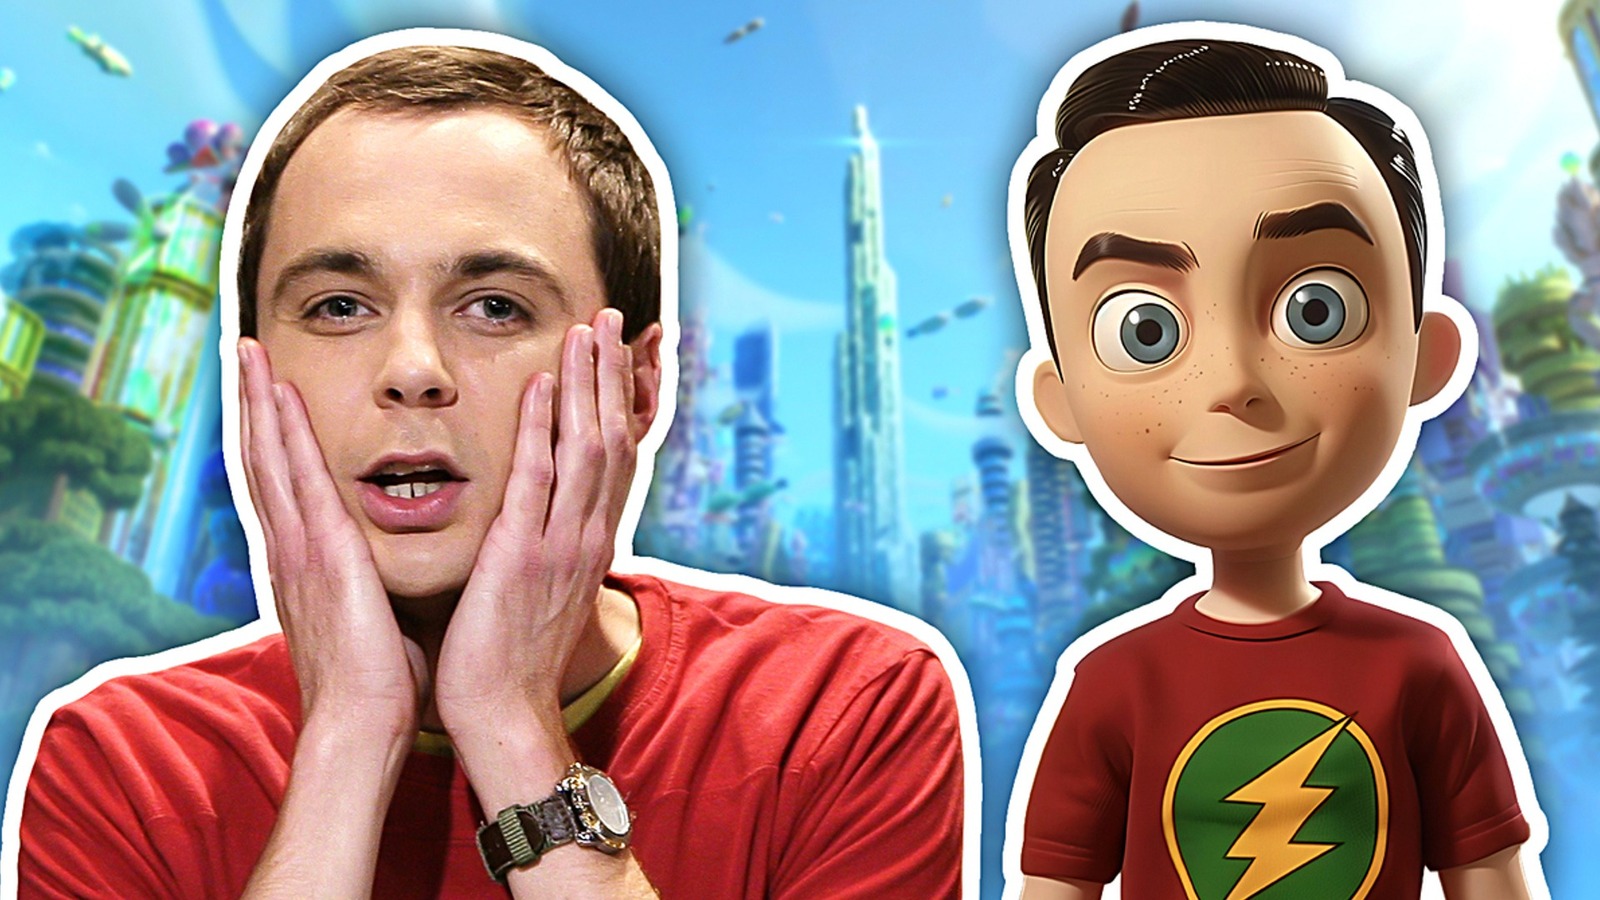 Unleashing the Power of AI: Pixar-Style Big Bang Theory Remake is Mind-Blowing!